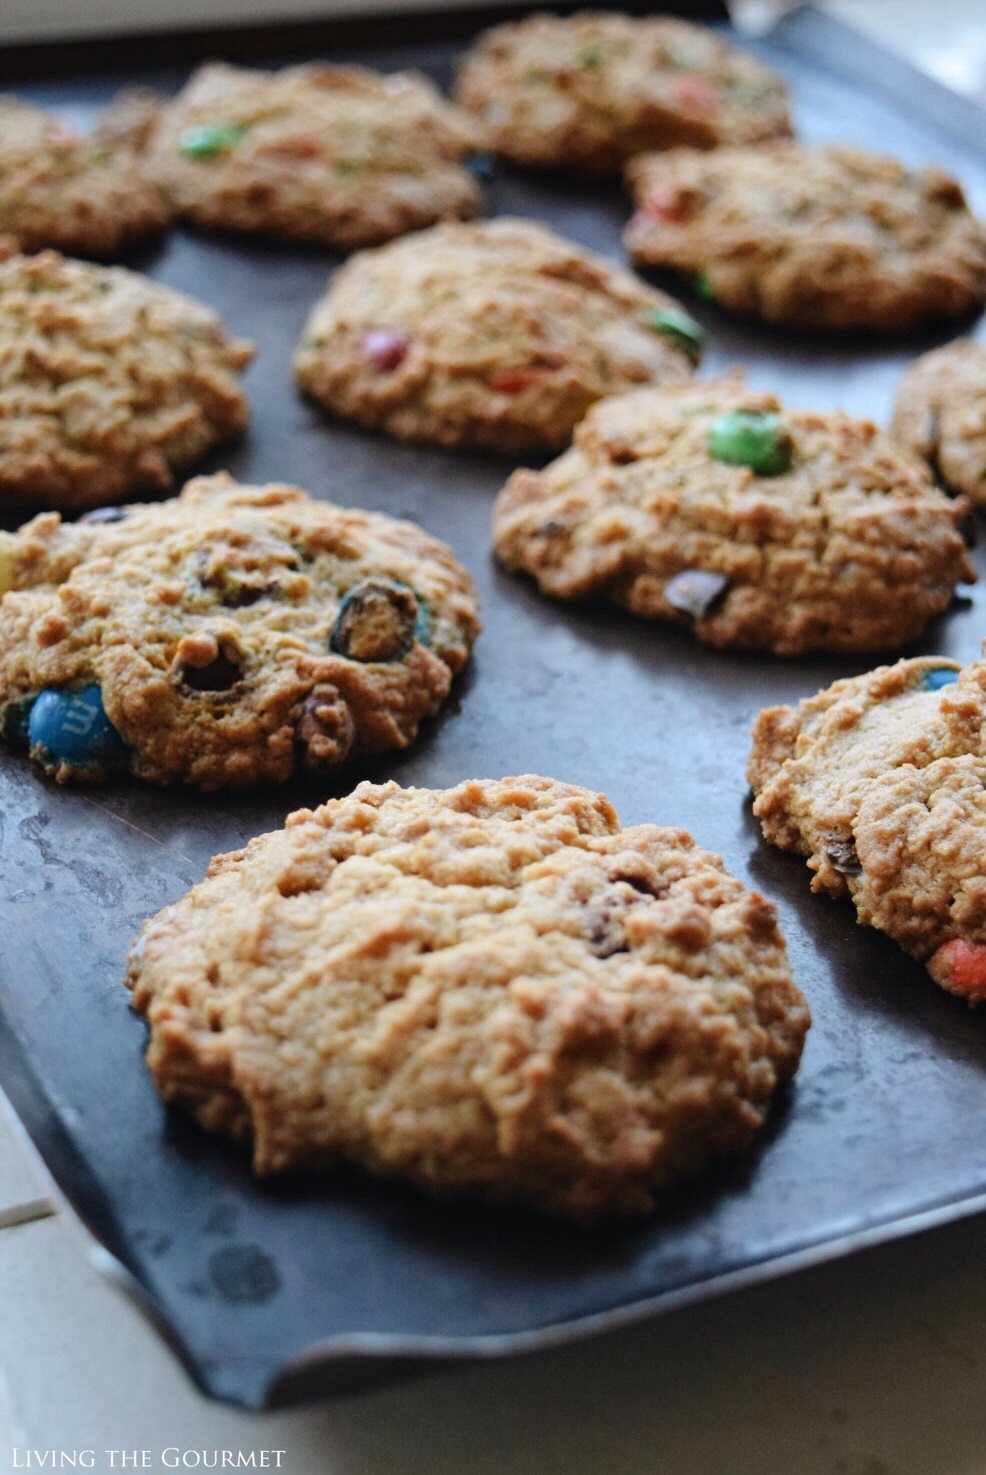 Living the Gourmet: M&M's Chocolate Chip Cookies